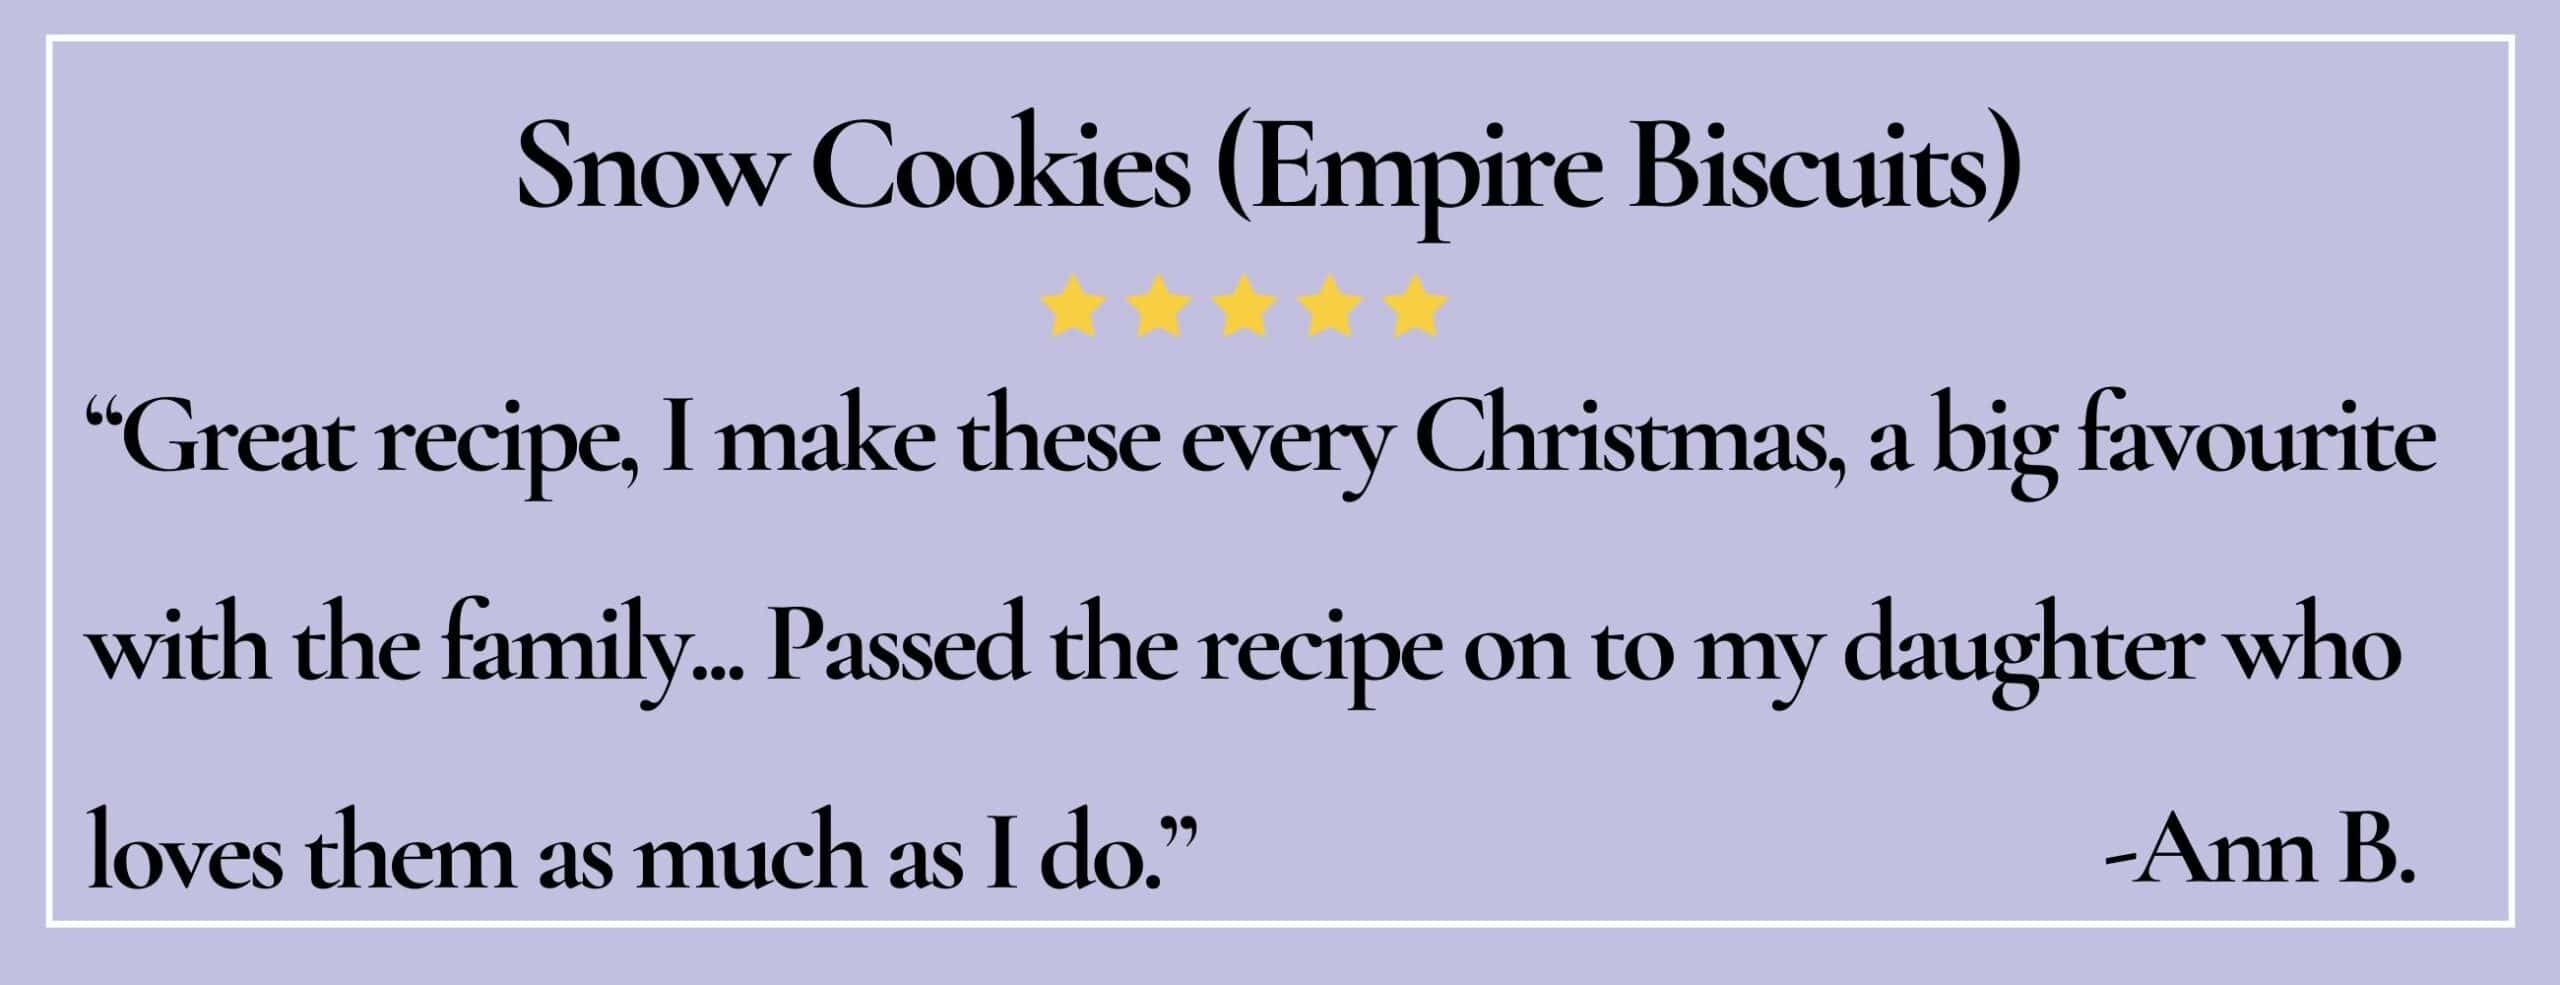 Text box with paraphrase: Great recipe, I make these every Christmas, a big favourite with the family. -Ann B.